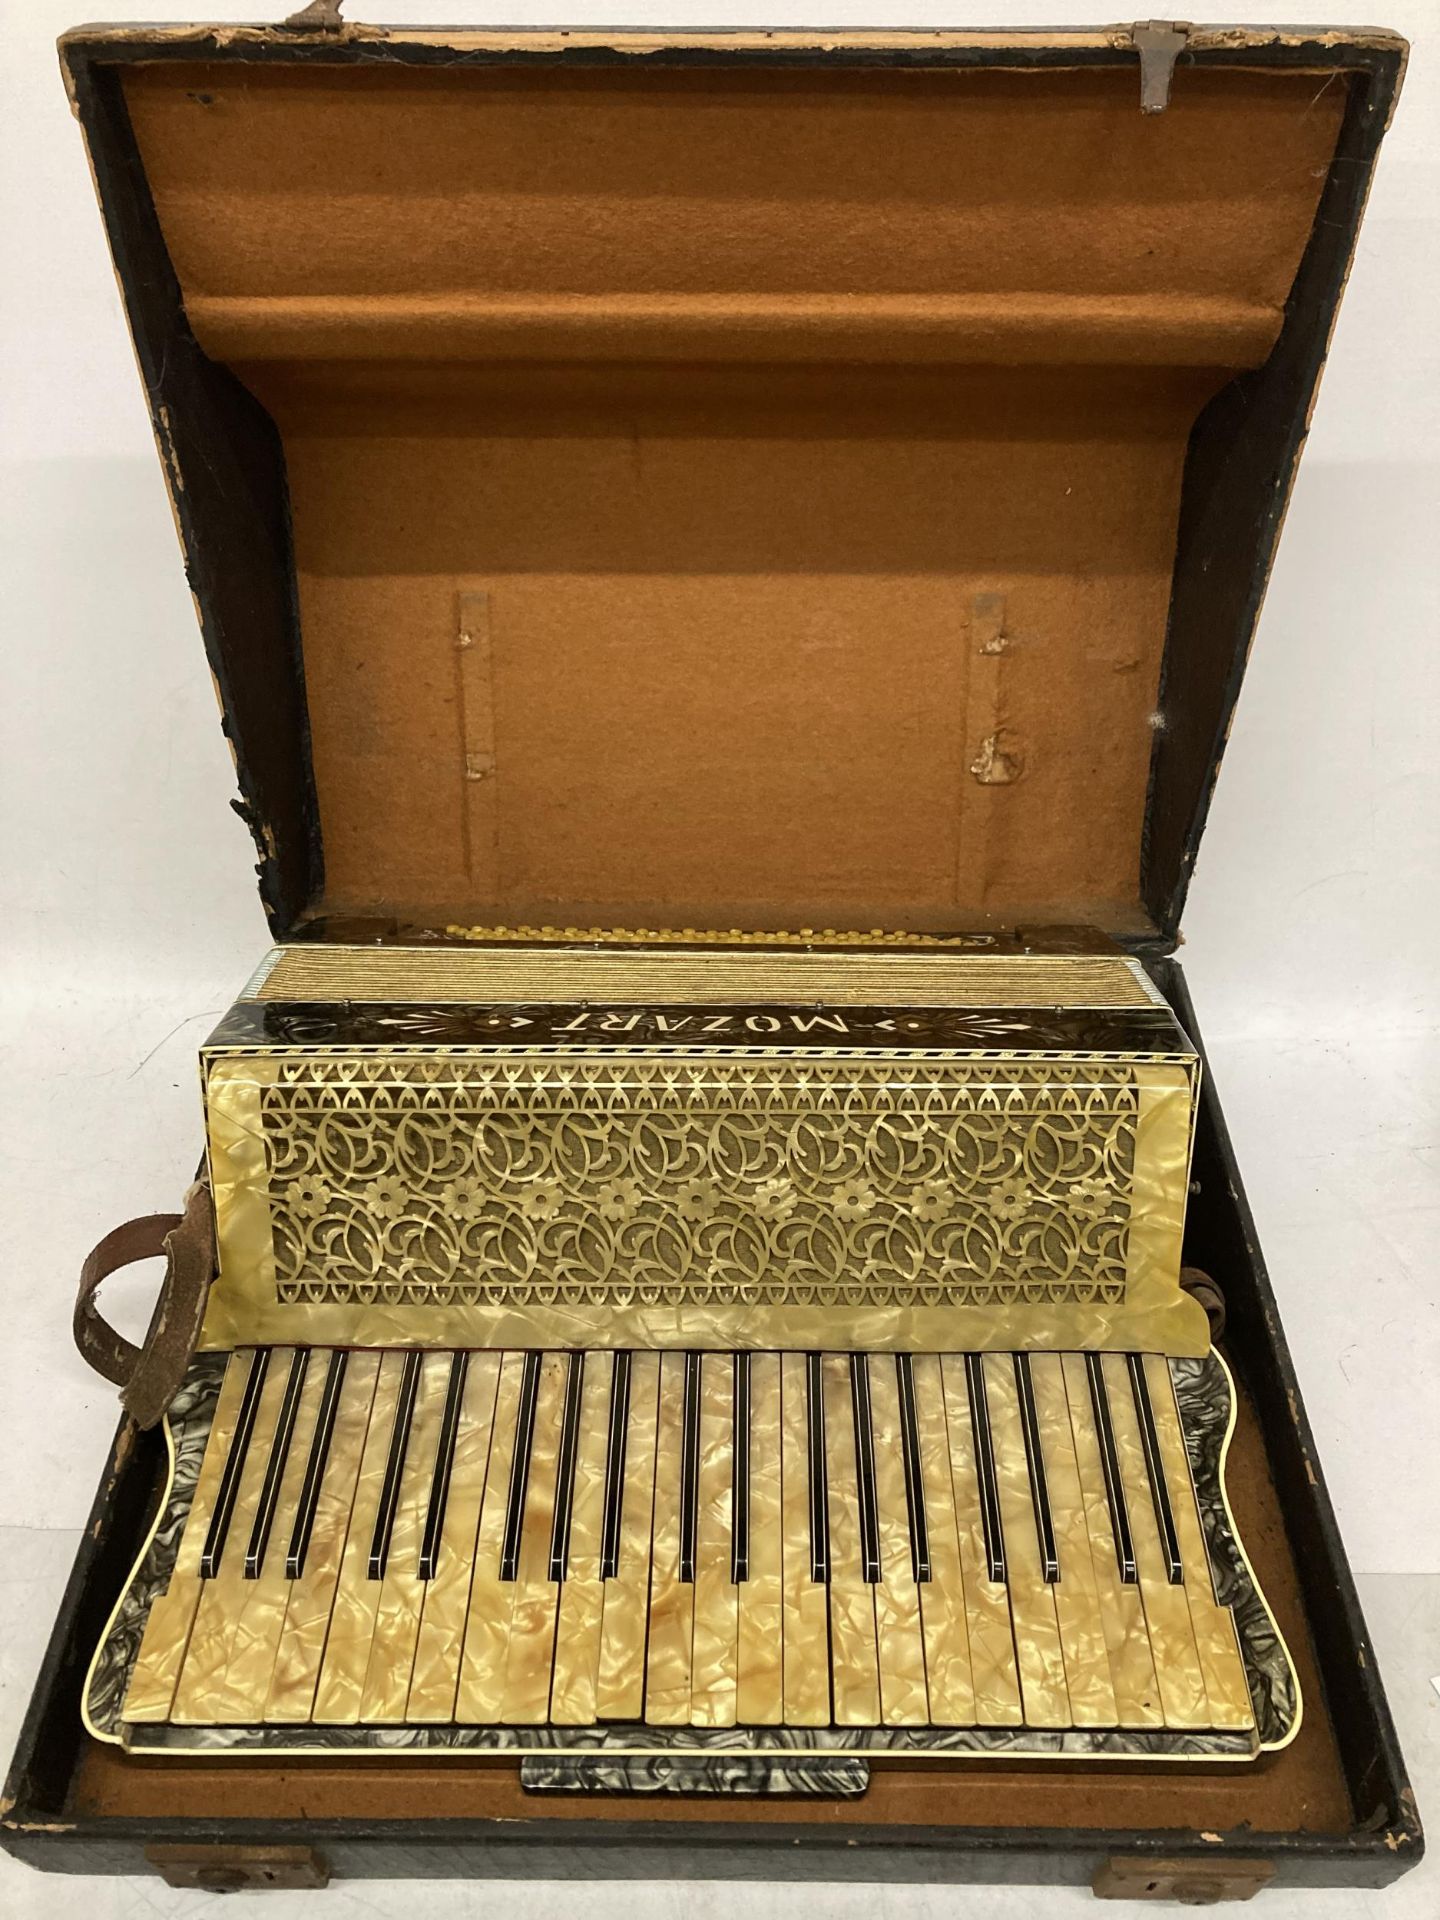 A VINTAGE CASED MOZART ACCORDION WITH INLAID DESIGN